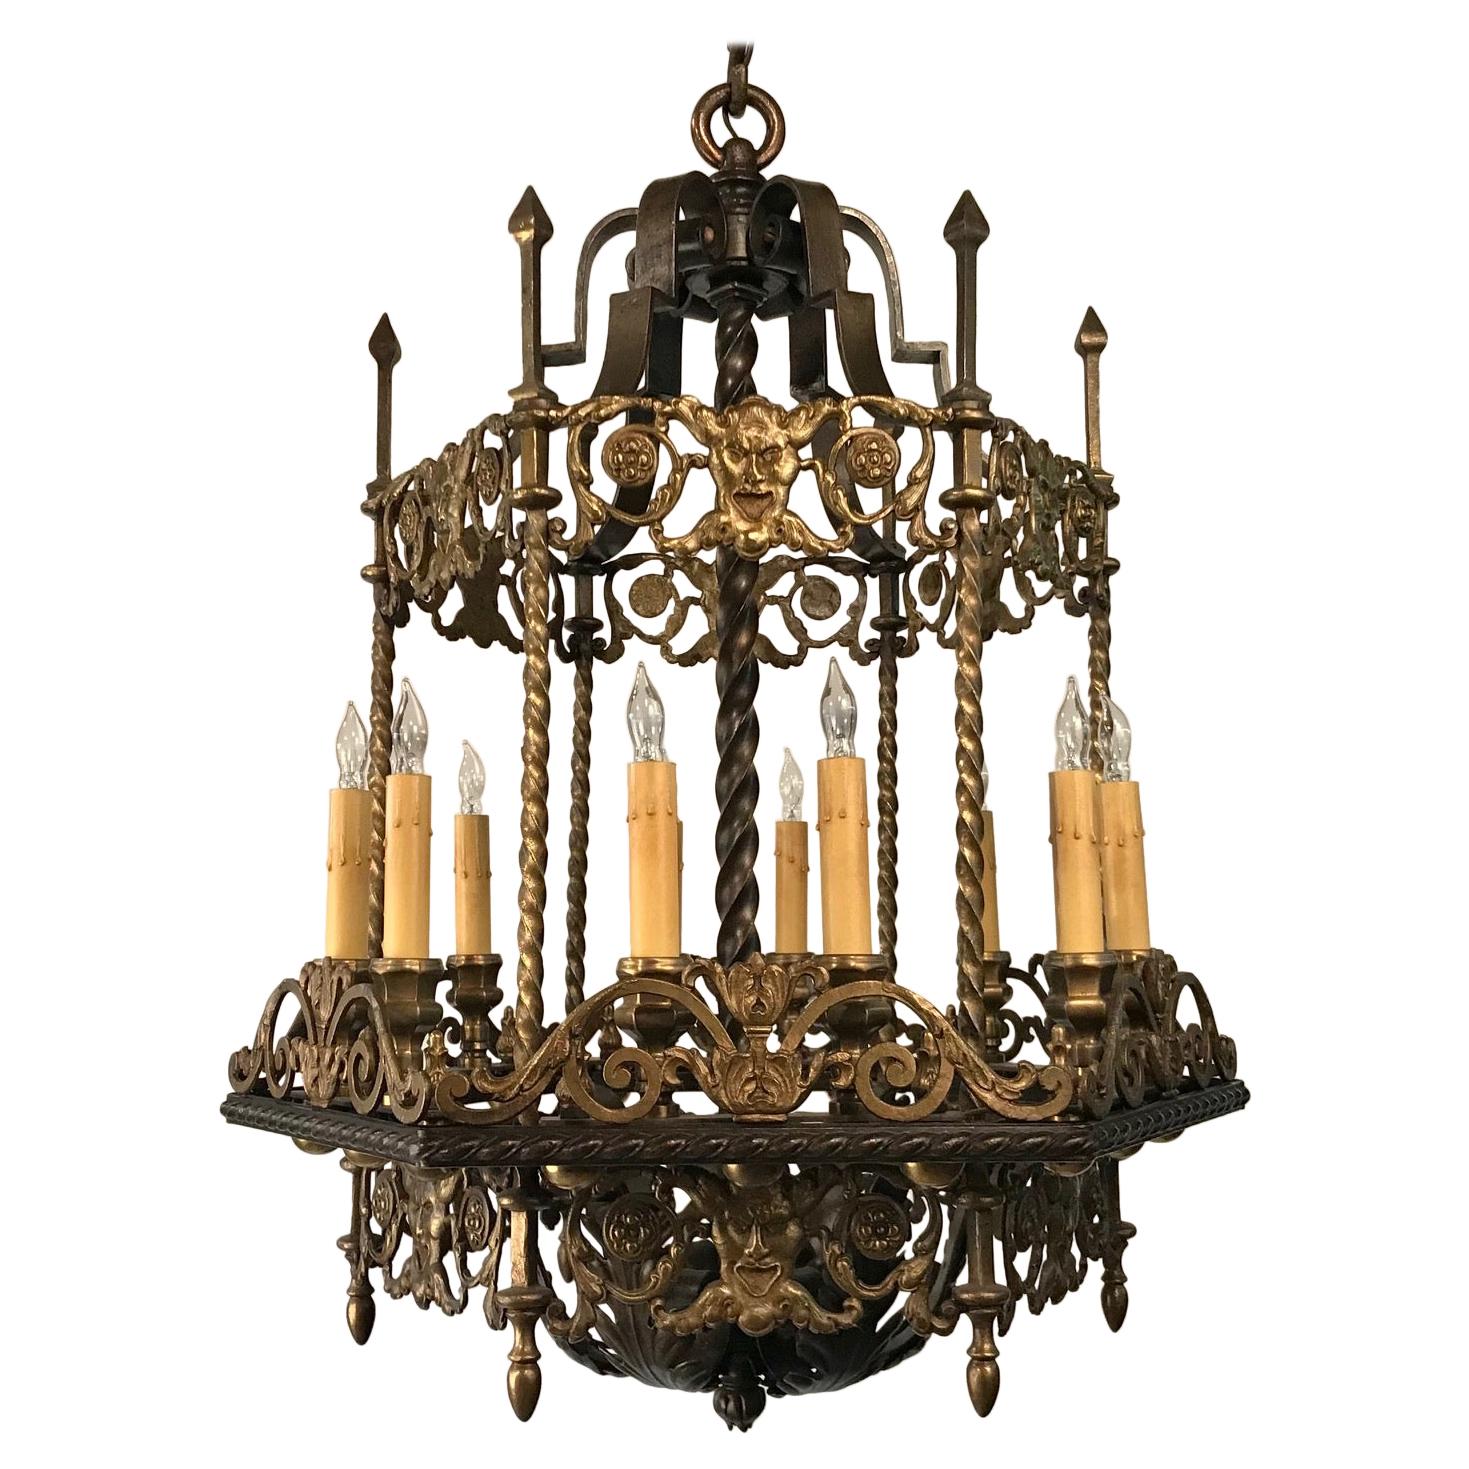 An Antique 12 Light Neo-Renaissance  Bronze and Wrought Iron Chandelier For Sale